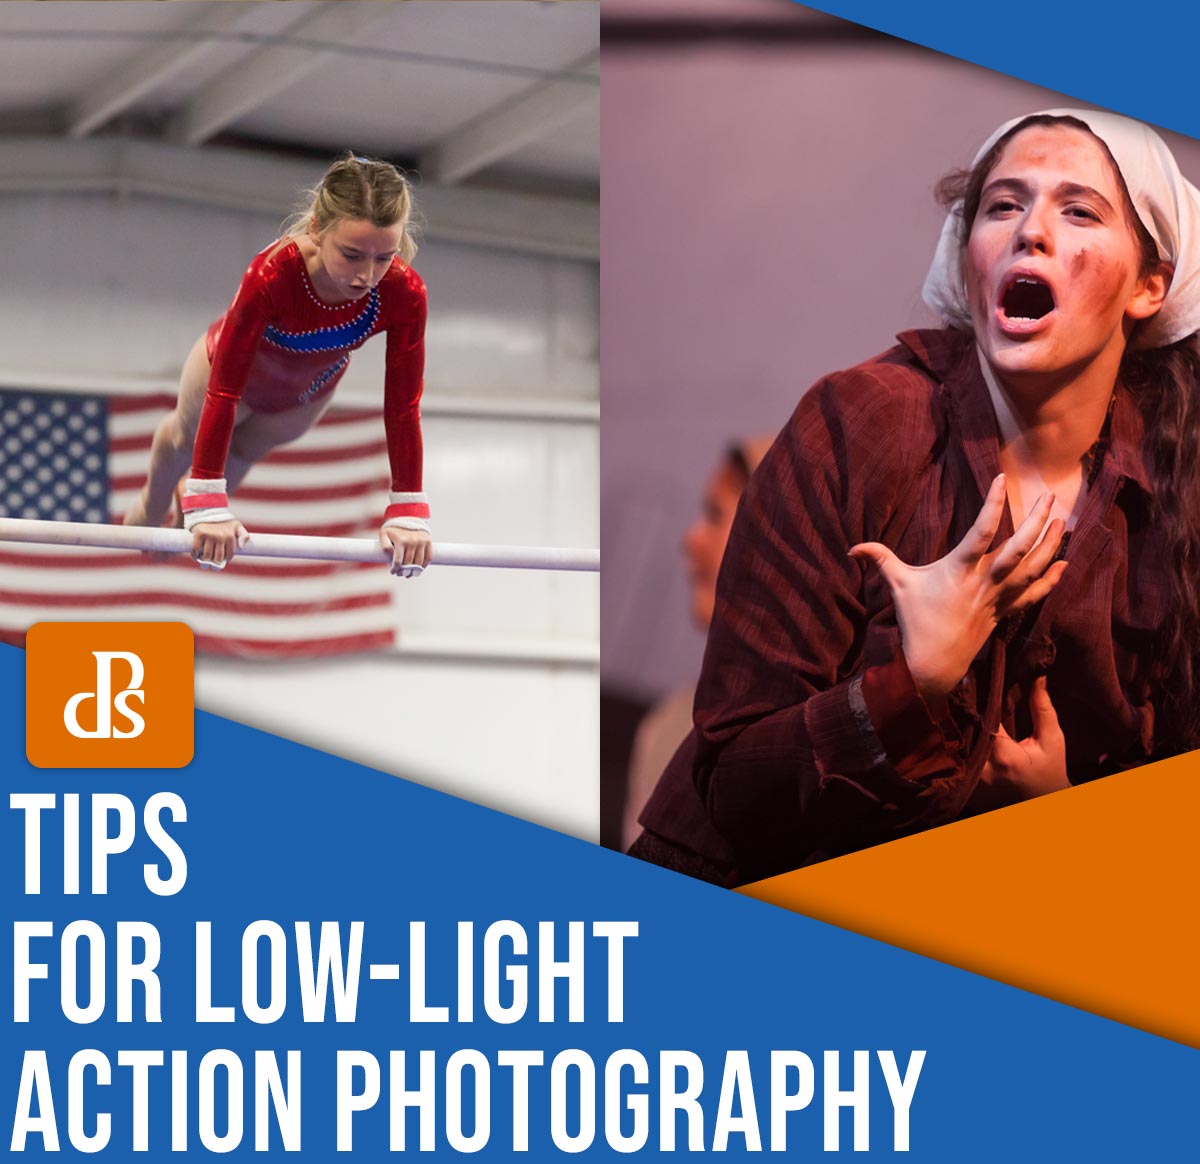 Tips for low-light action photography